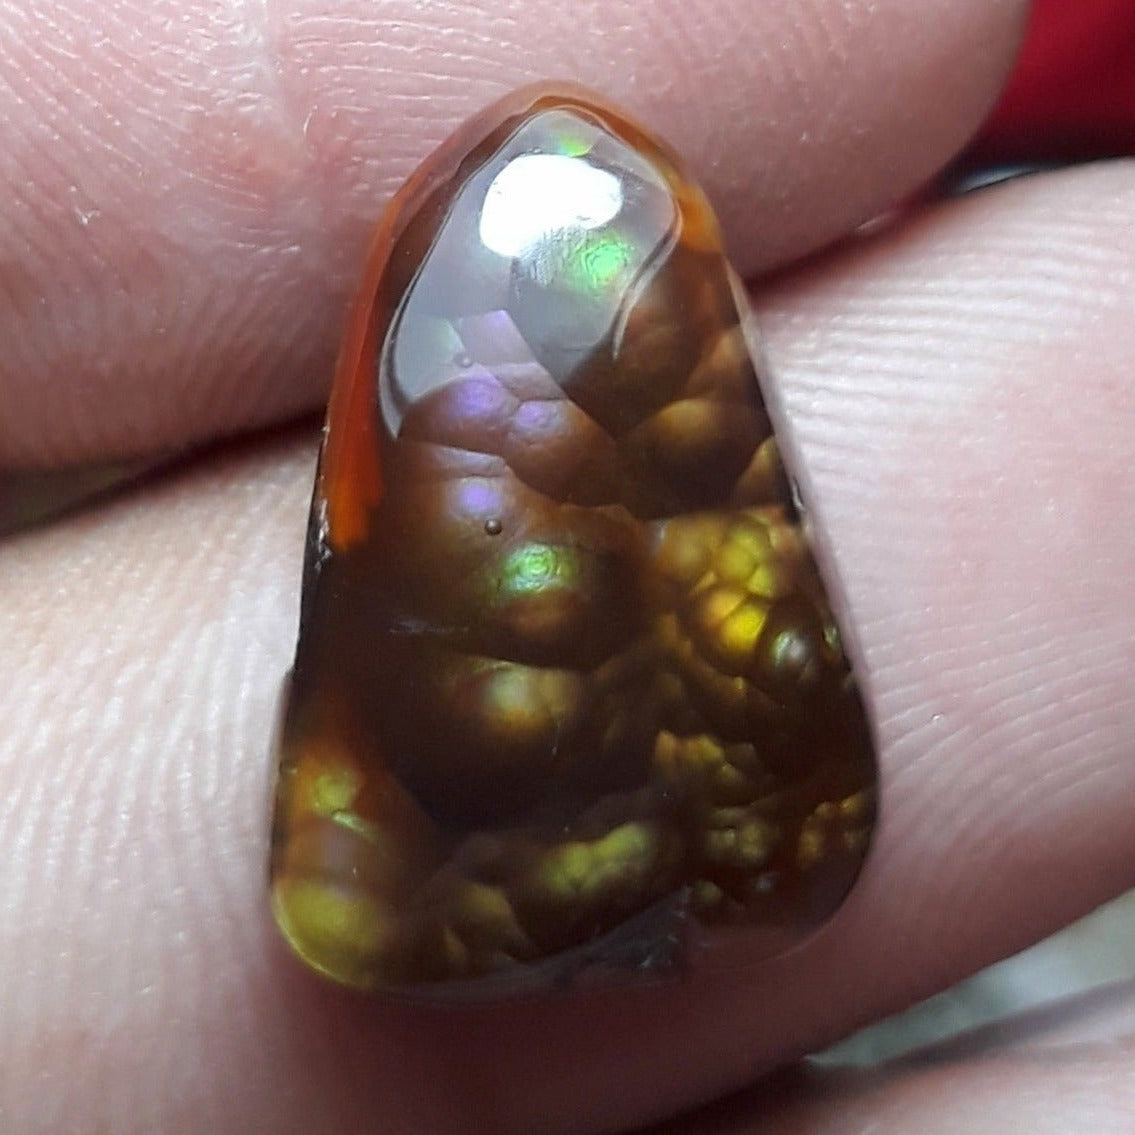 11.2ct Bubbly Fire Agate wit green purple and yellow hues - Perfect Gemstone Gift For All - Dimensions 18x13x6mm